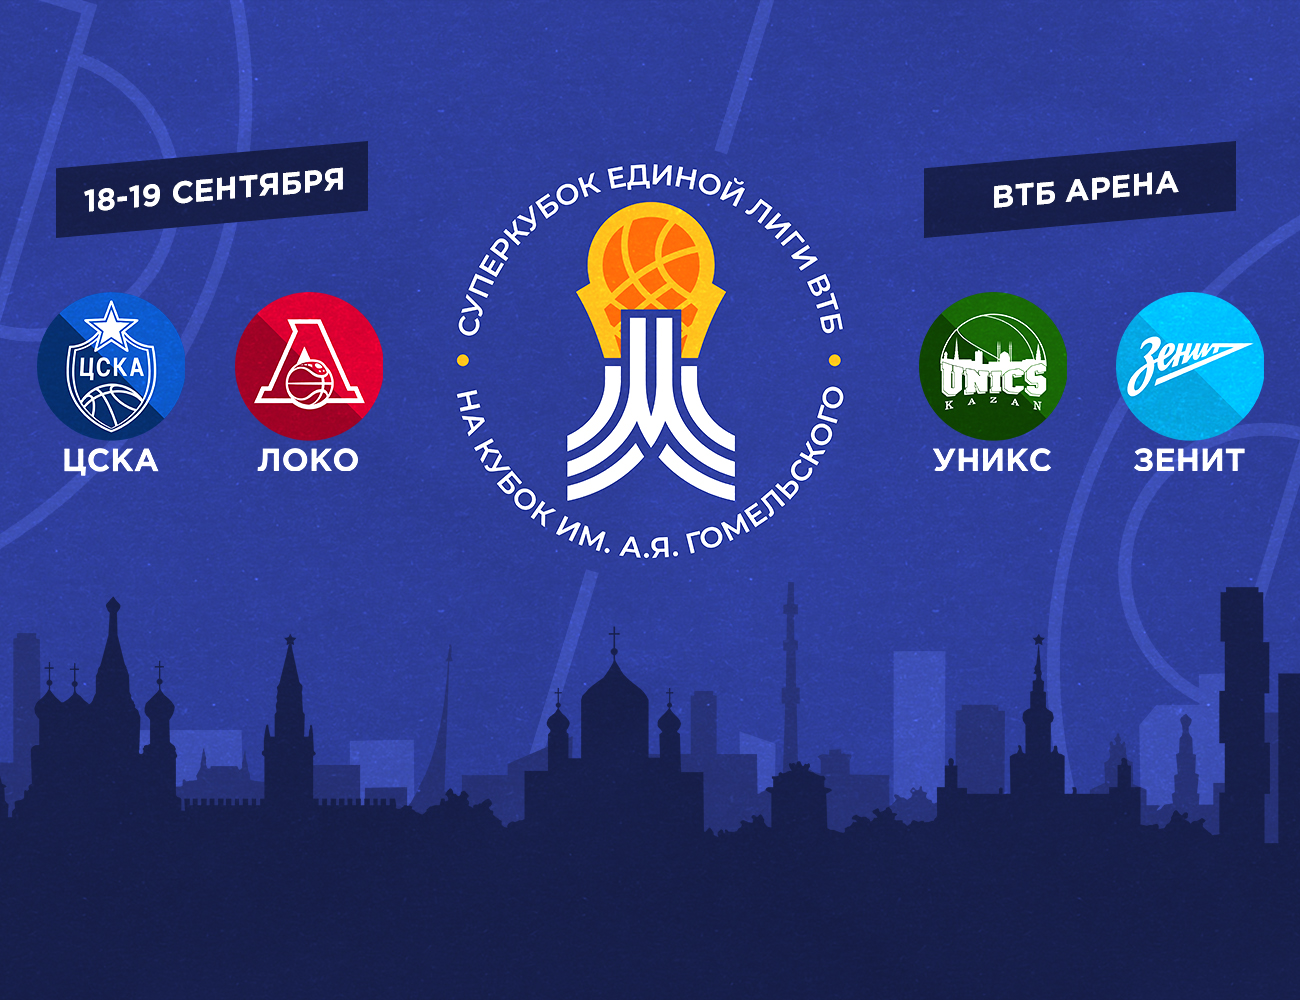 Basketball is back! The VTB United League SuperCup will be held on September 18-19 at the VTB Arena